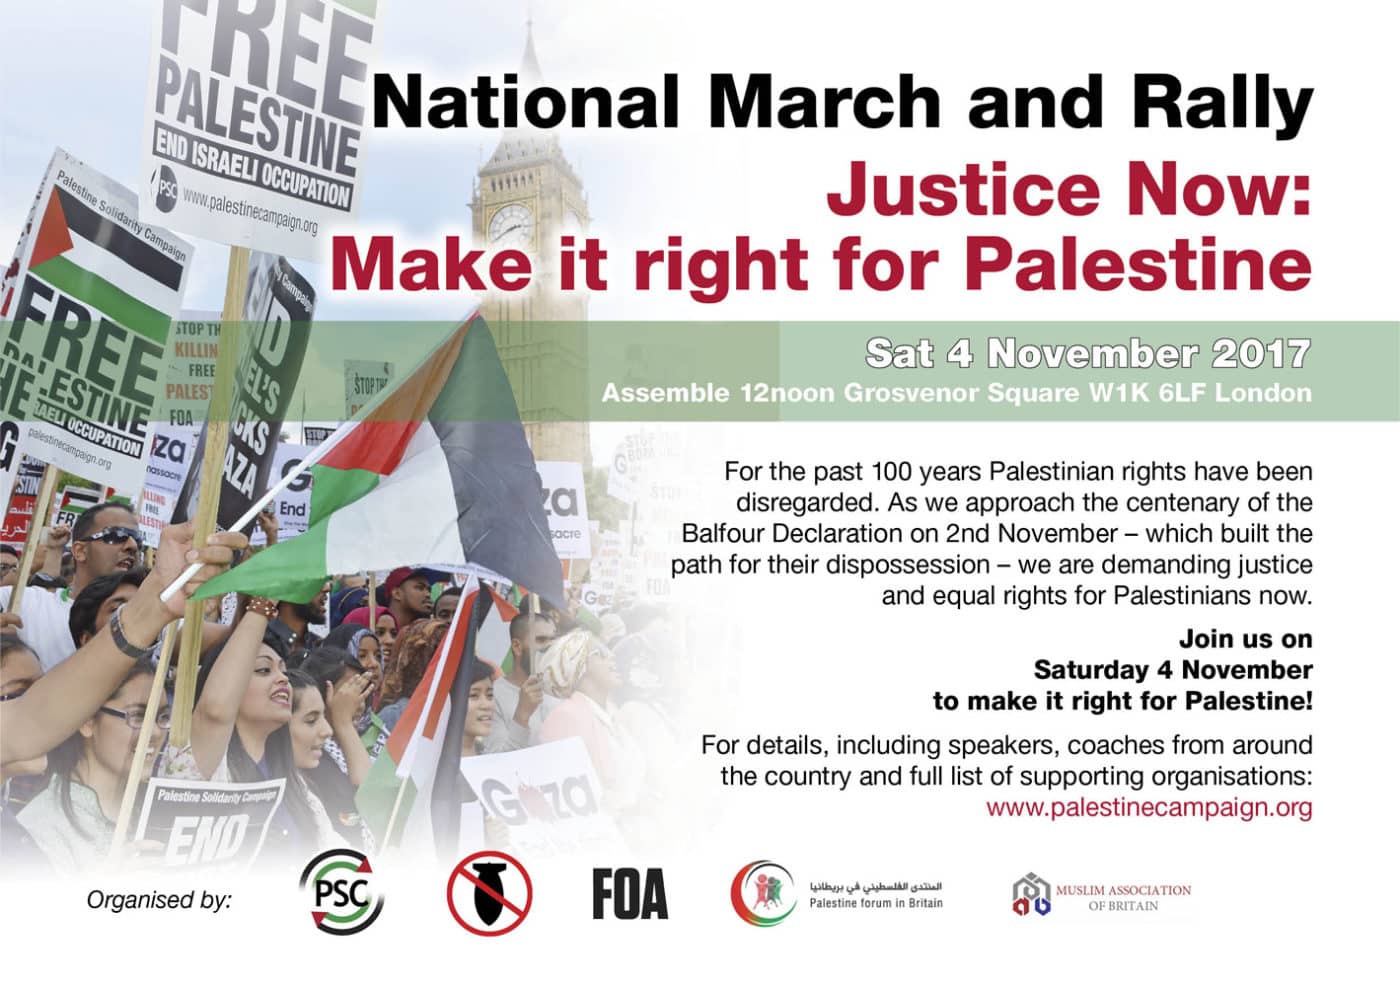 National March and Rally - Justice Now: Make it right for Palestine